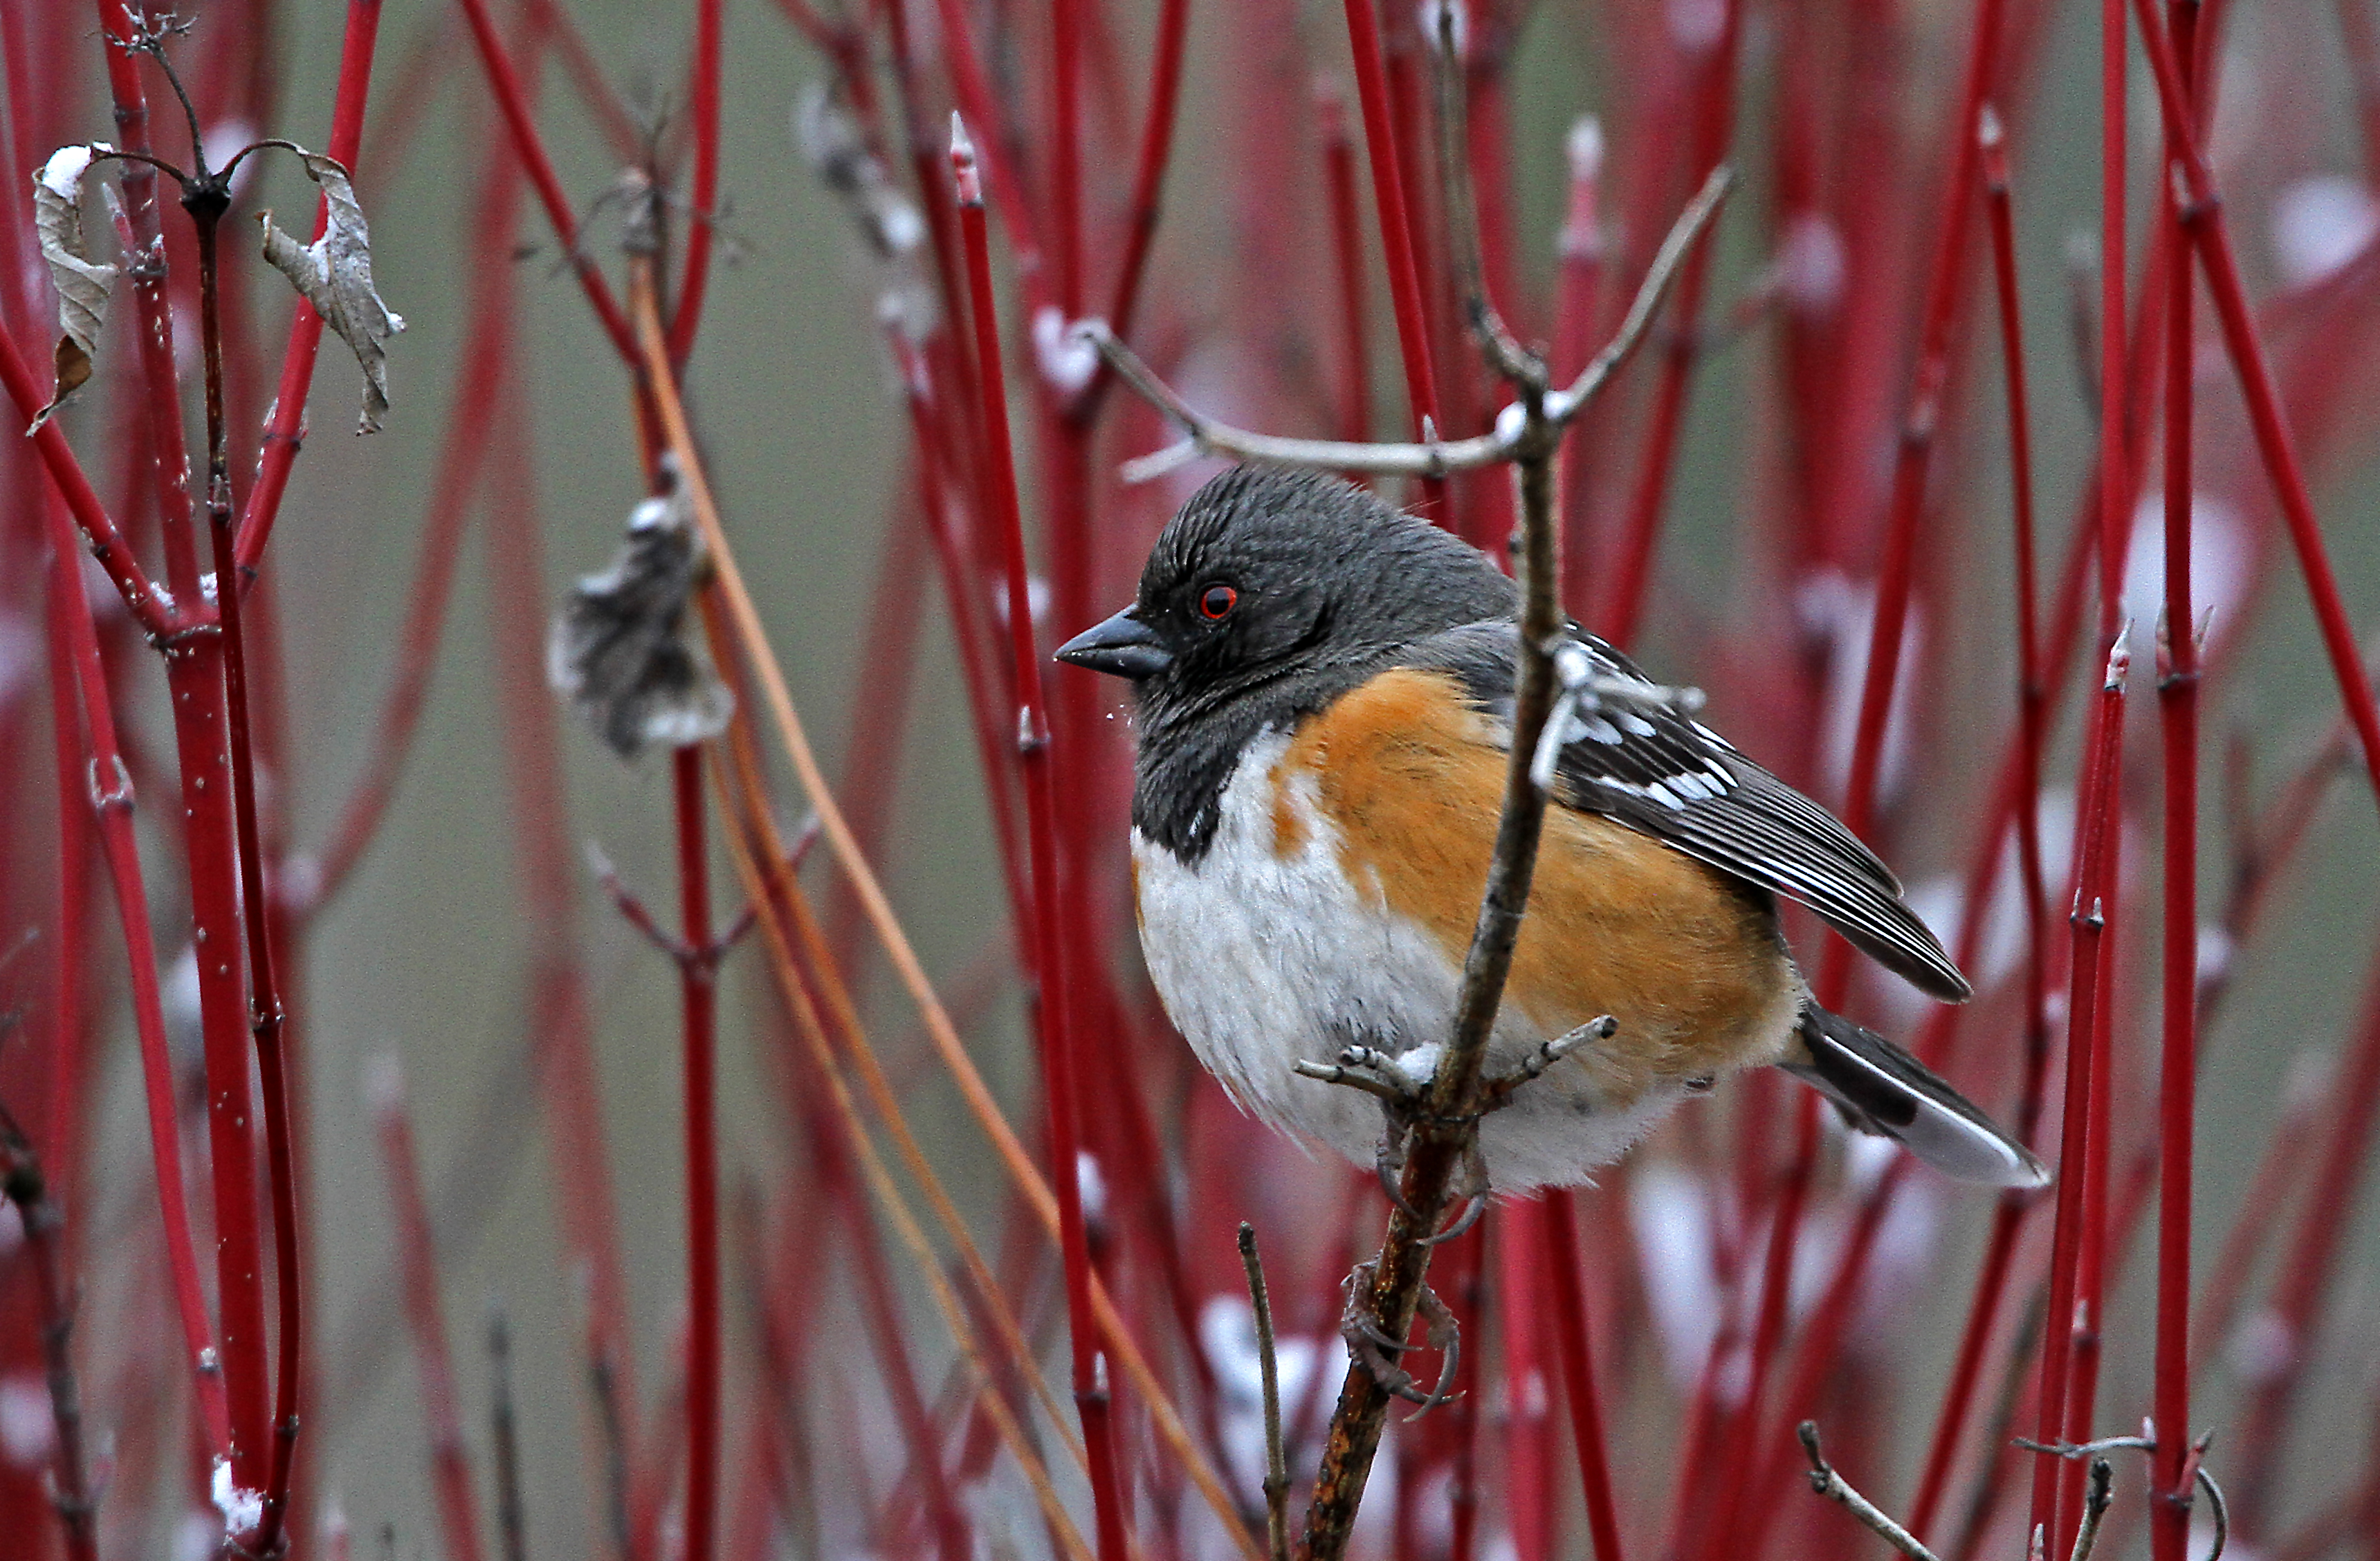 A beautiful male spotted towhee perched on red-osier dogwood branch.